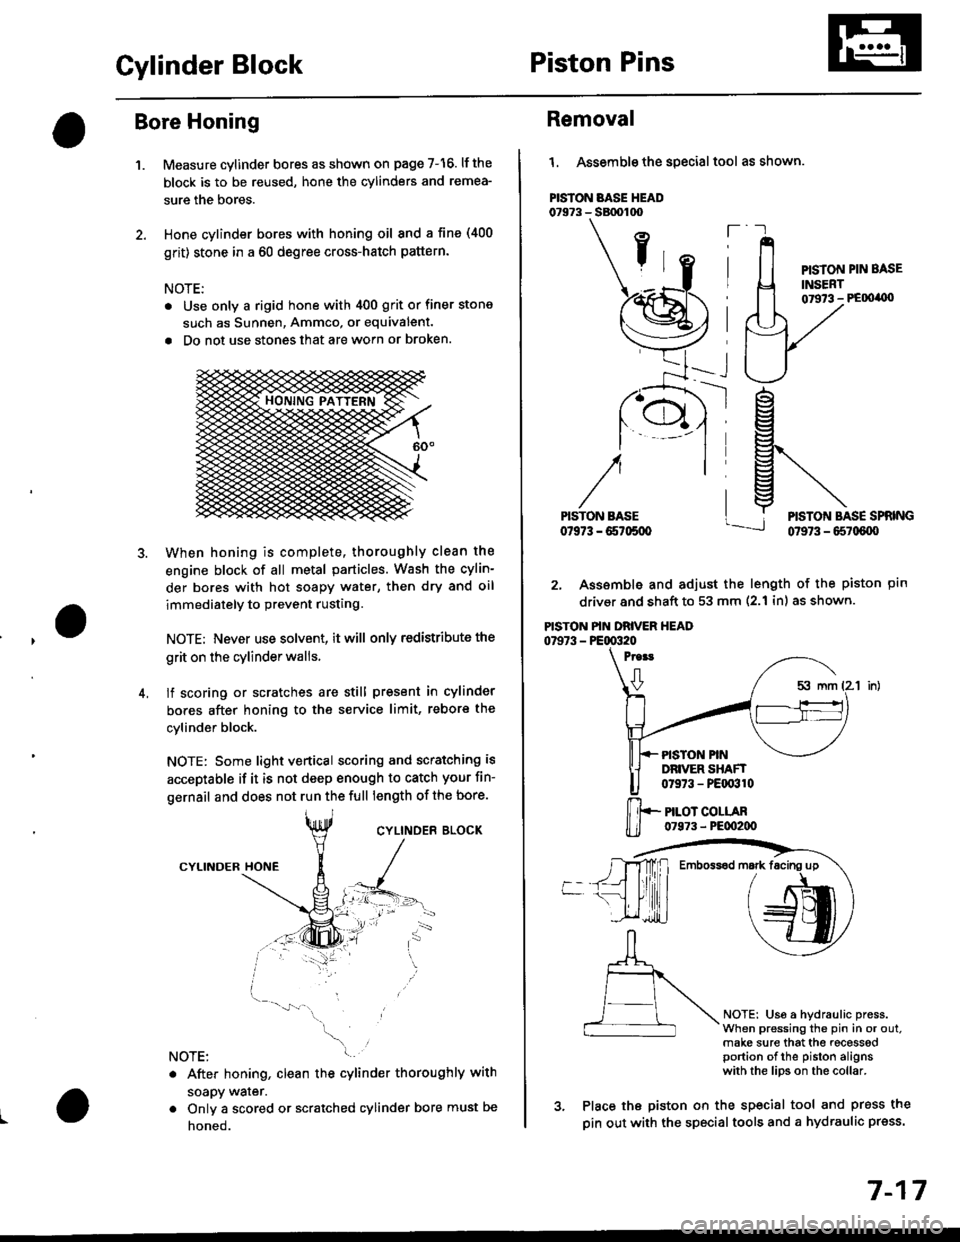 HONDA CIVIC 1996 6.G Workshop Manual Cylinder BlockPiston Pins
Bore Honing
1.Measure cylinder bores as shown on page 7-16. lf the
block is to be reused, hone the cylinders and remea-
sure the bores.
Hone cylinder bores with honing oil 8n